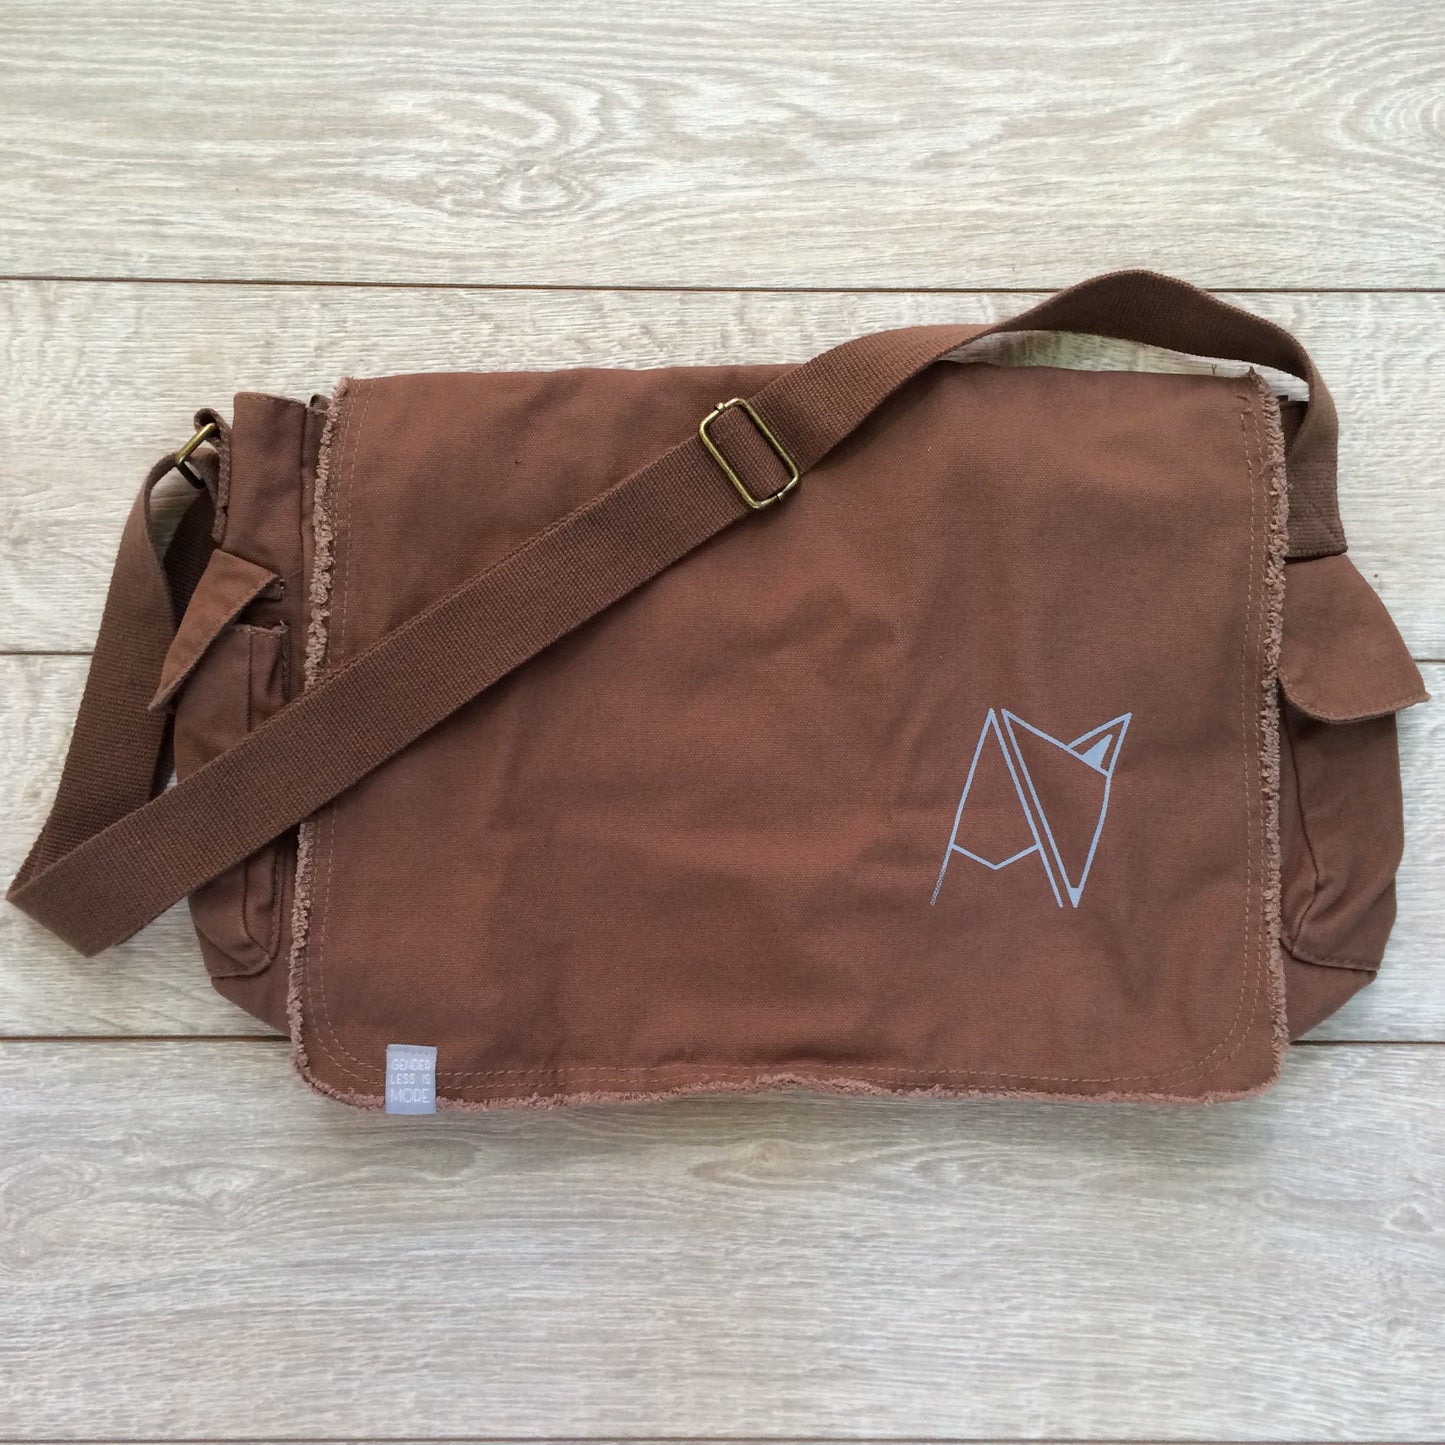 Brown Androgynous Fox Messenger Bag with adjustable strap and inside quick access pocket